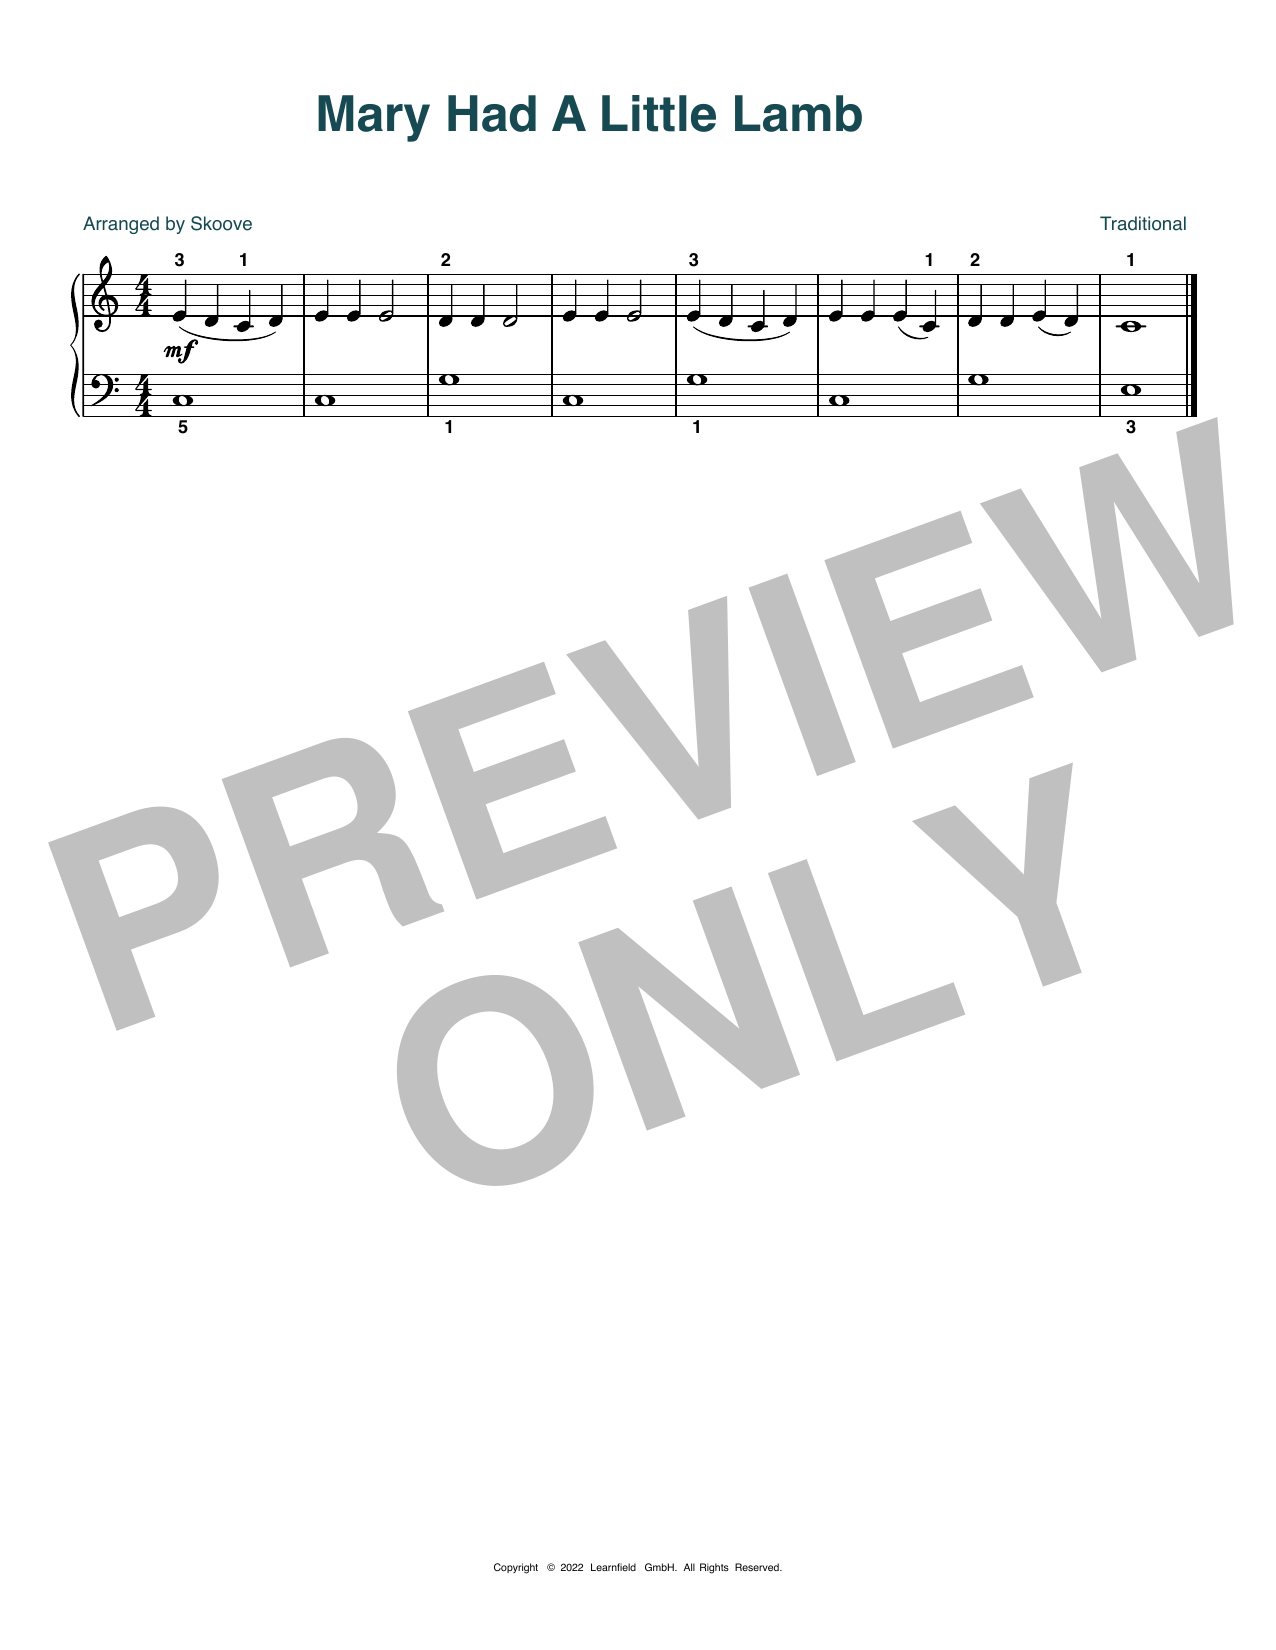 Download Traditional Mary Had A Little Lamb (arr. Skoove) Sheet Music